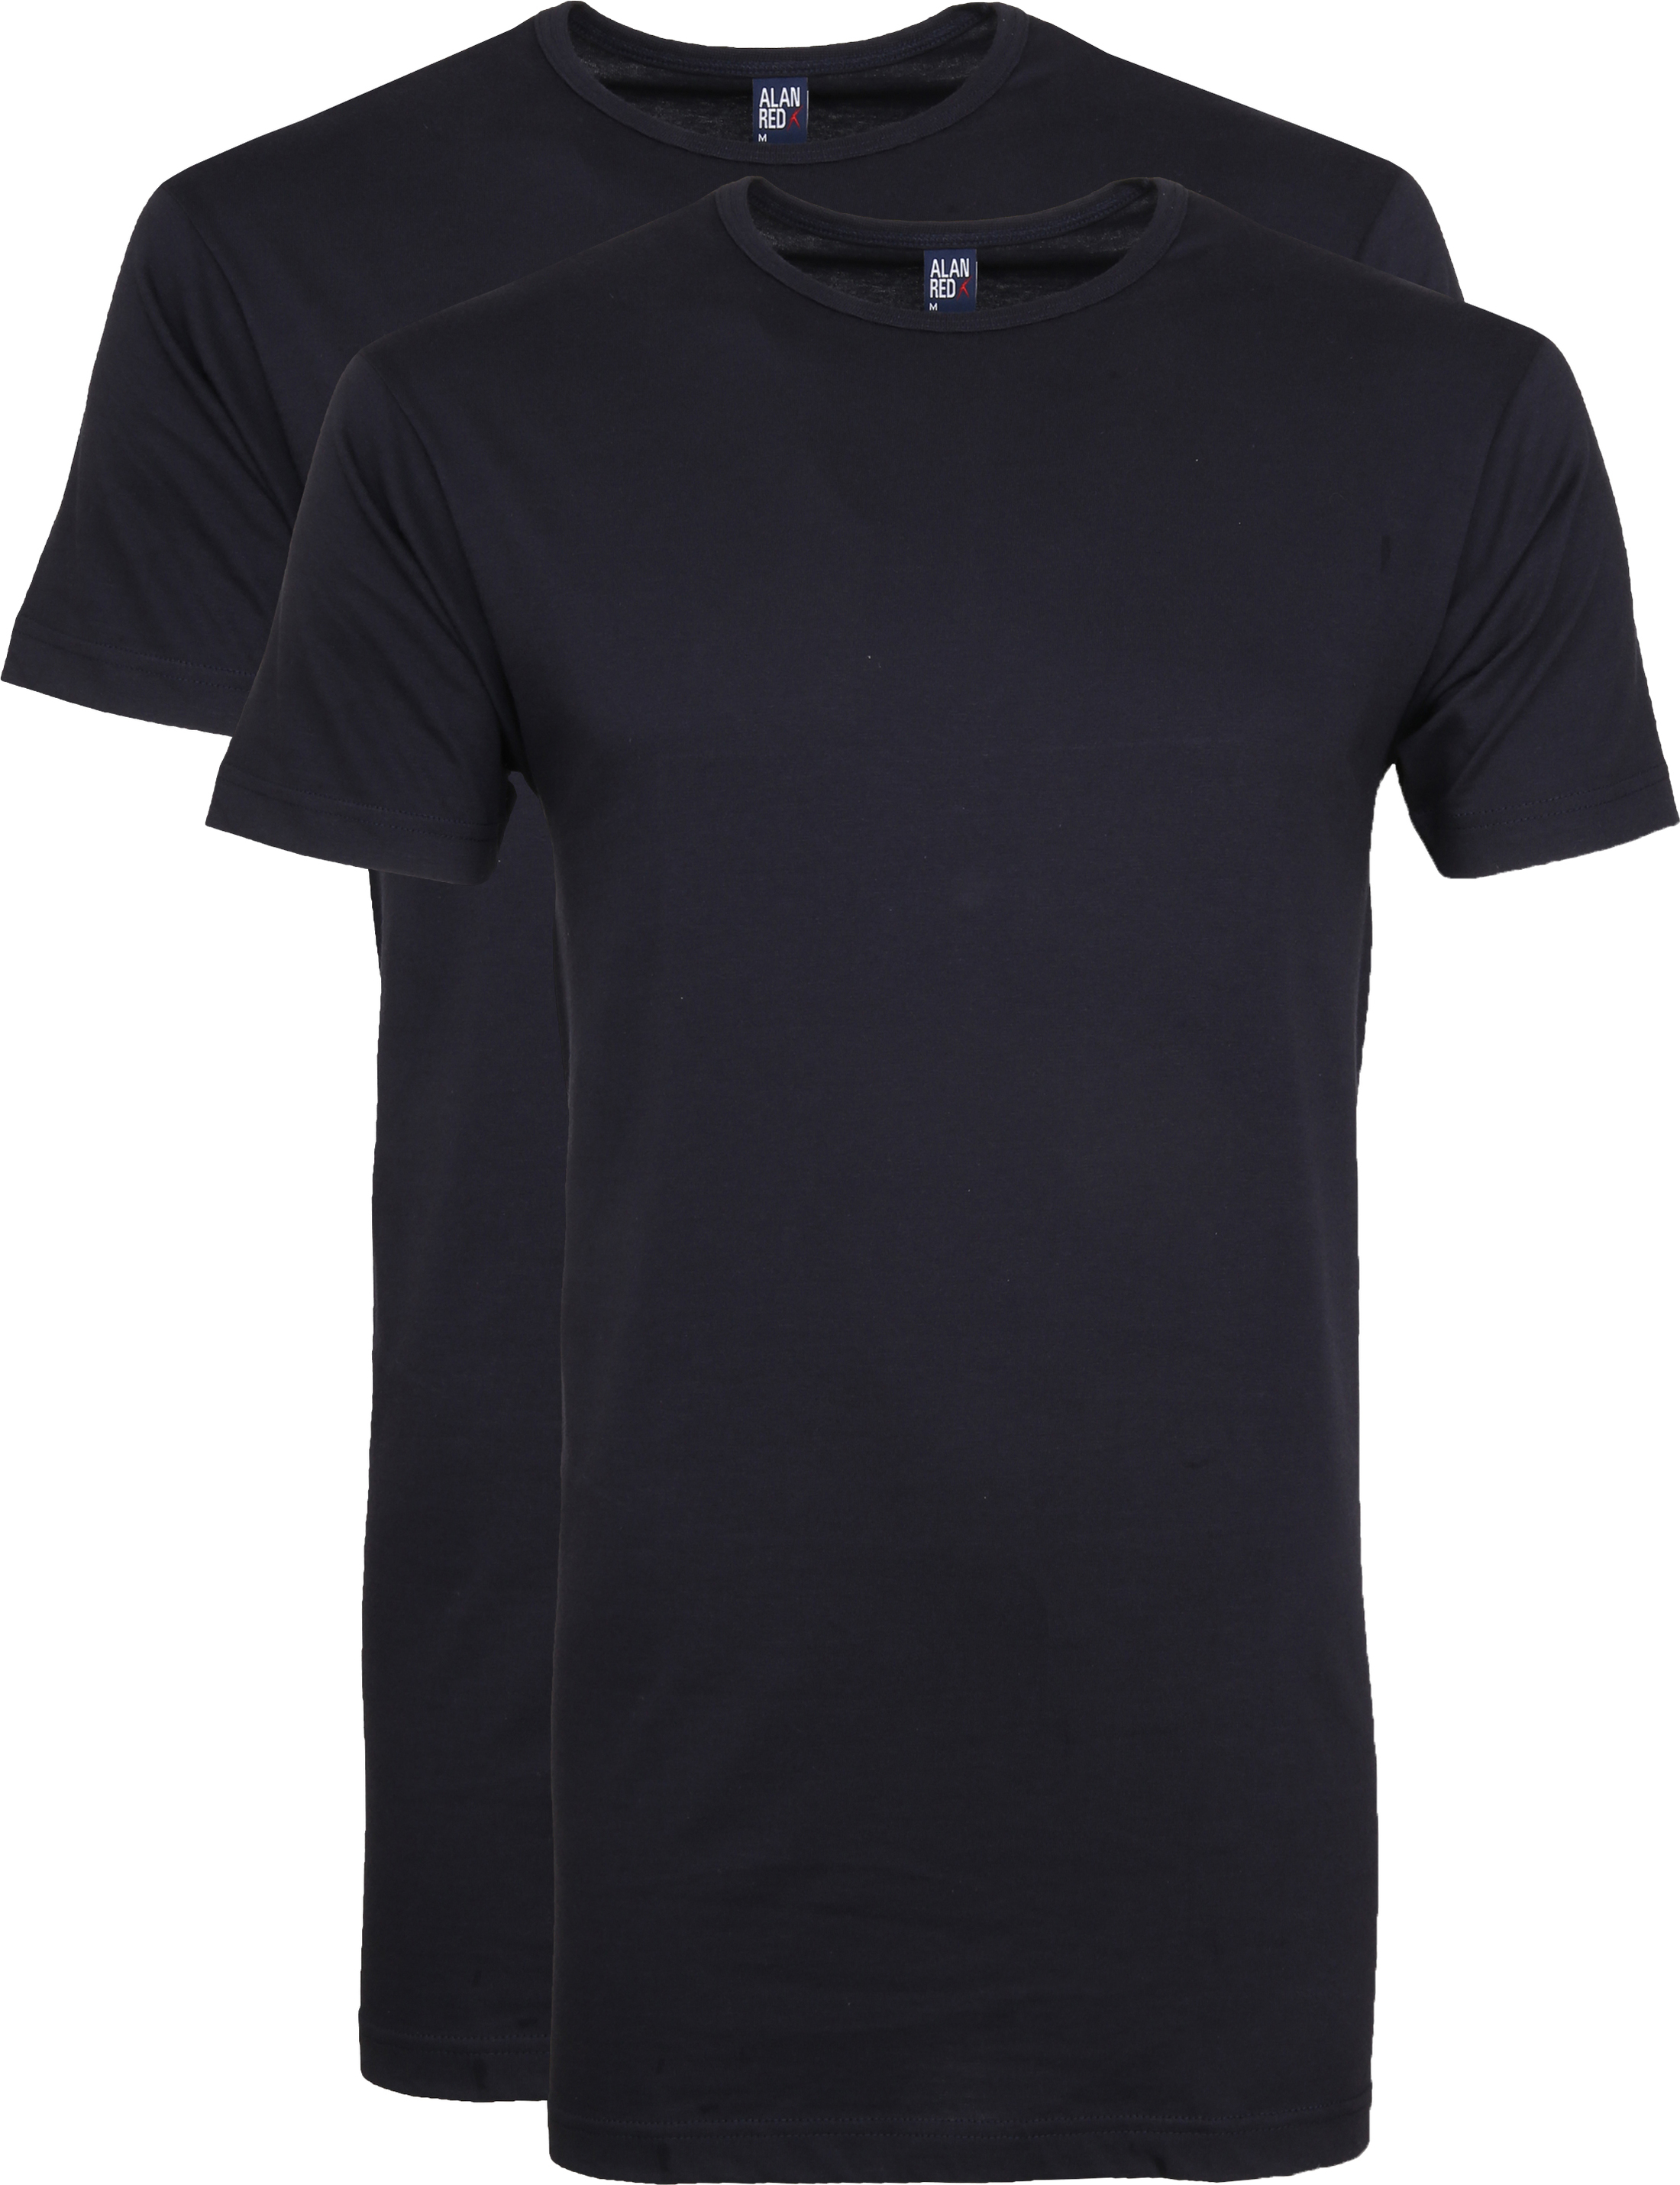 Derby Extra Lang T-Shirt Navy (2-Pack)